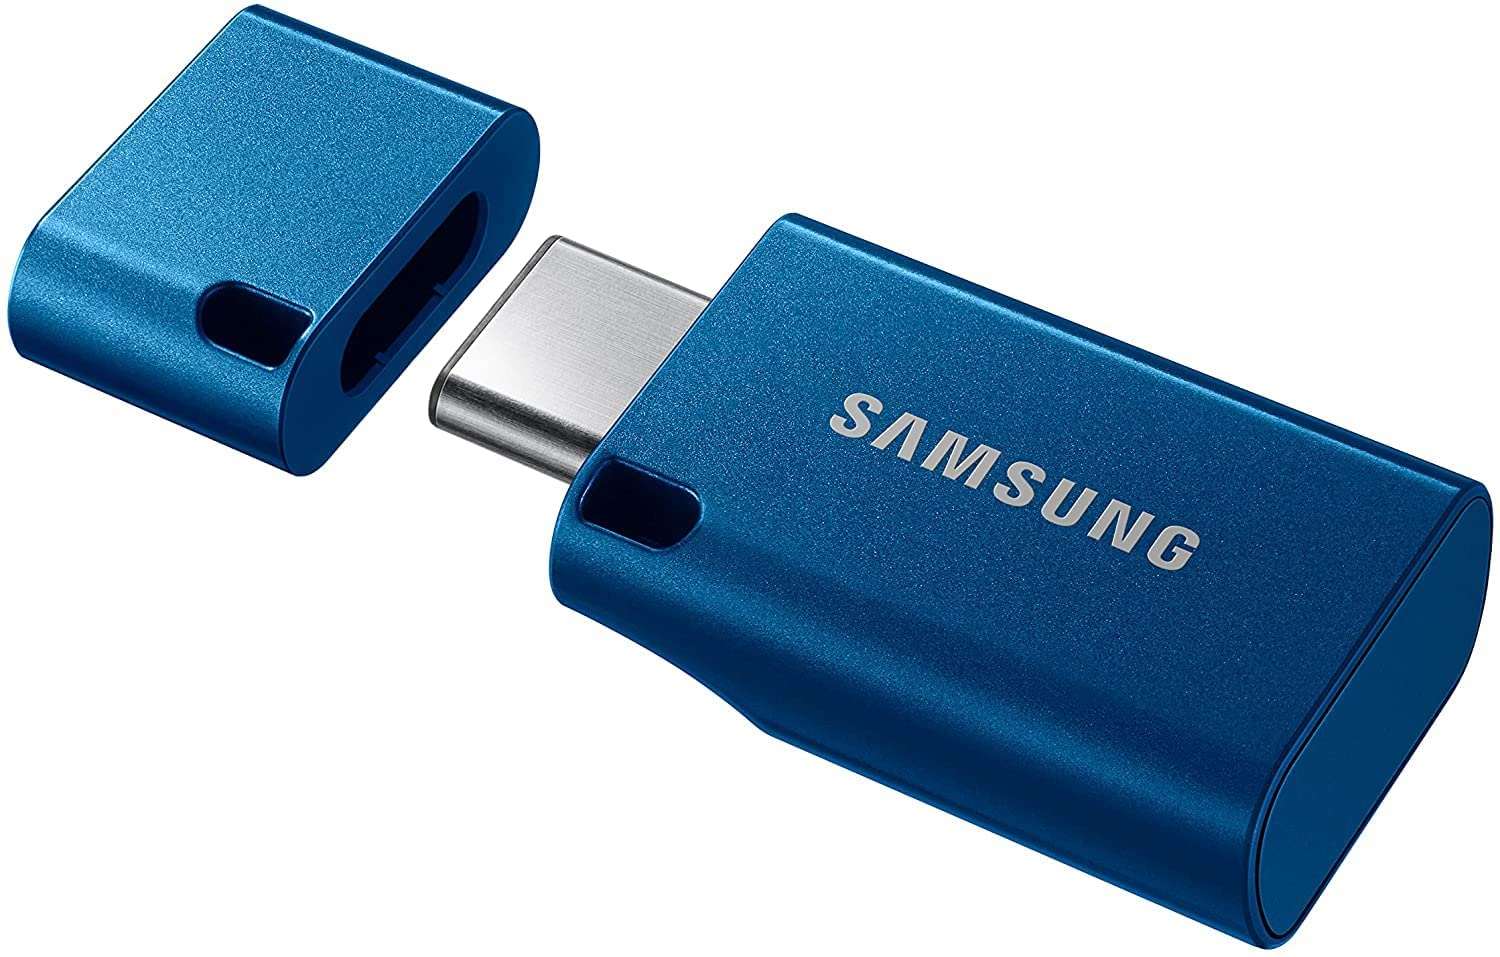 Samsung Type-C USB Drive, Blue, USB3.1, Transfer Speed up to 300MB/s